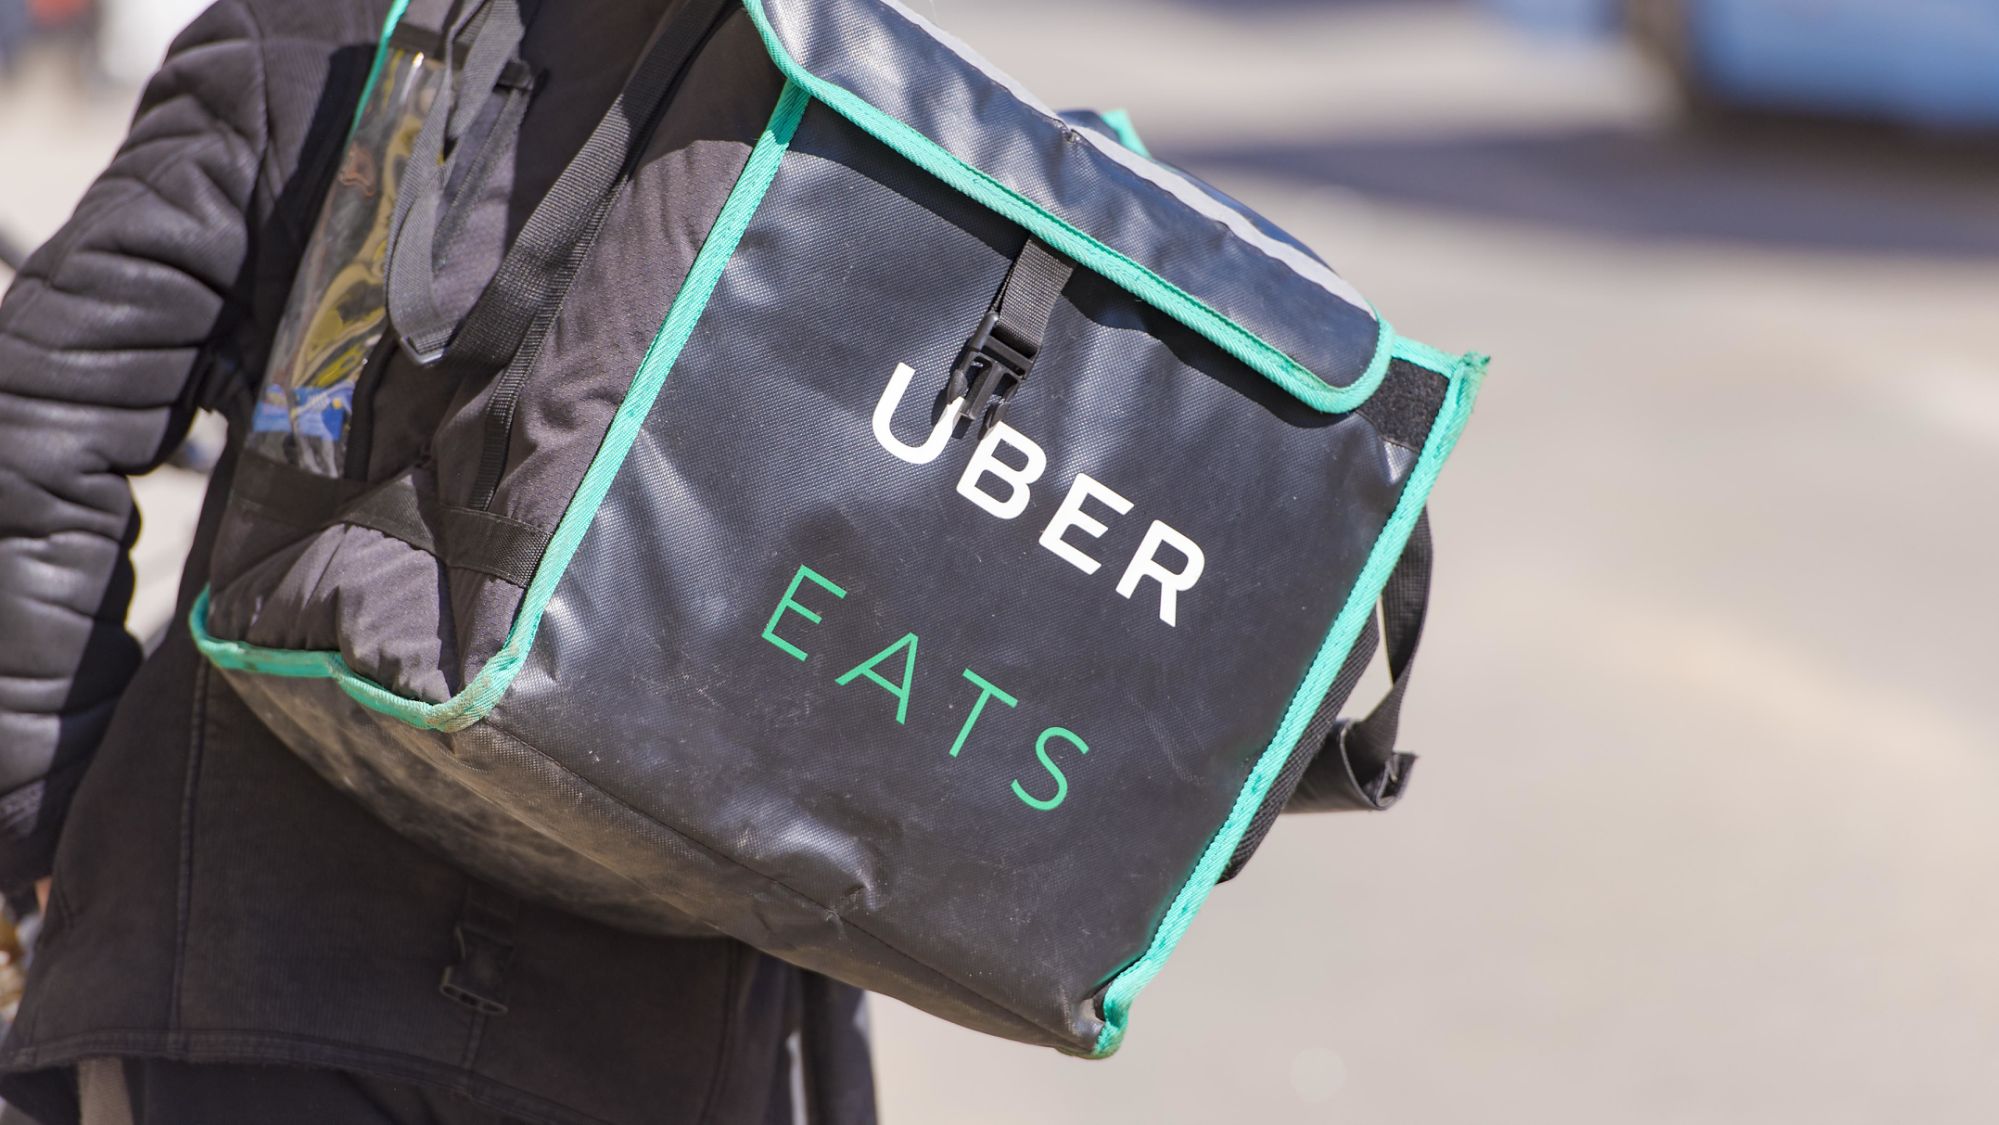 A café owner shares her frustration over Uber Eats' use of her company for unauthorized listing

